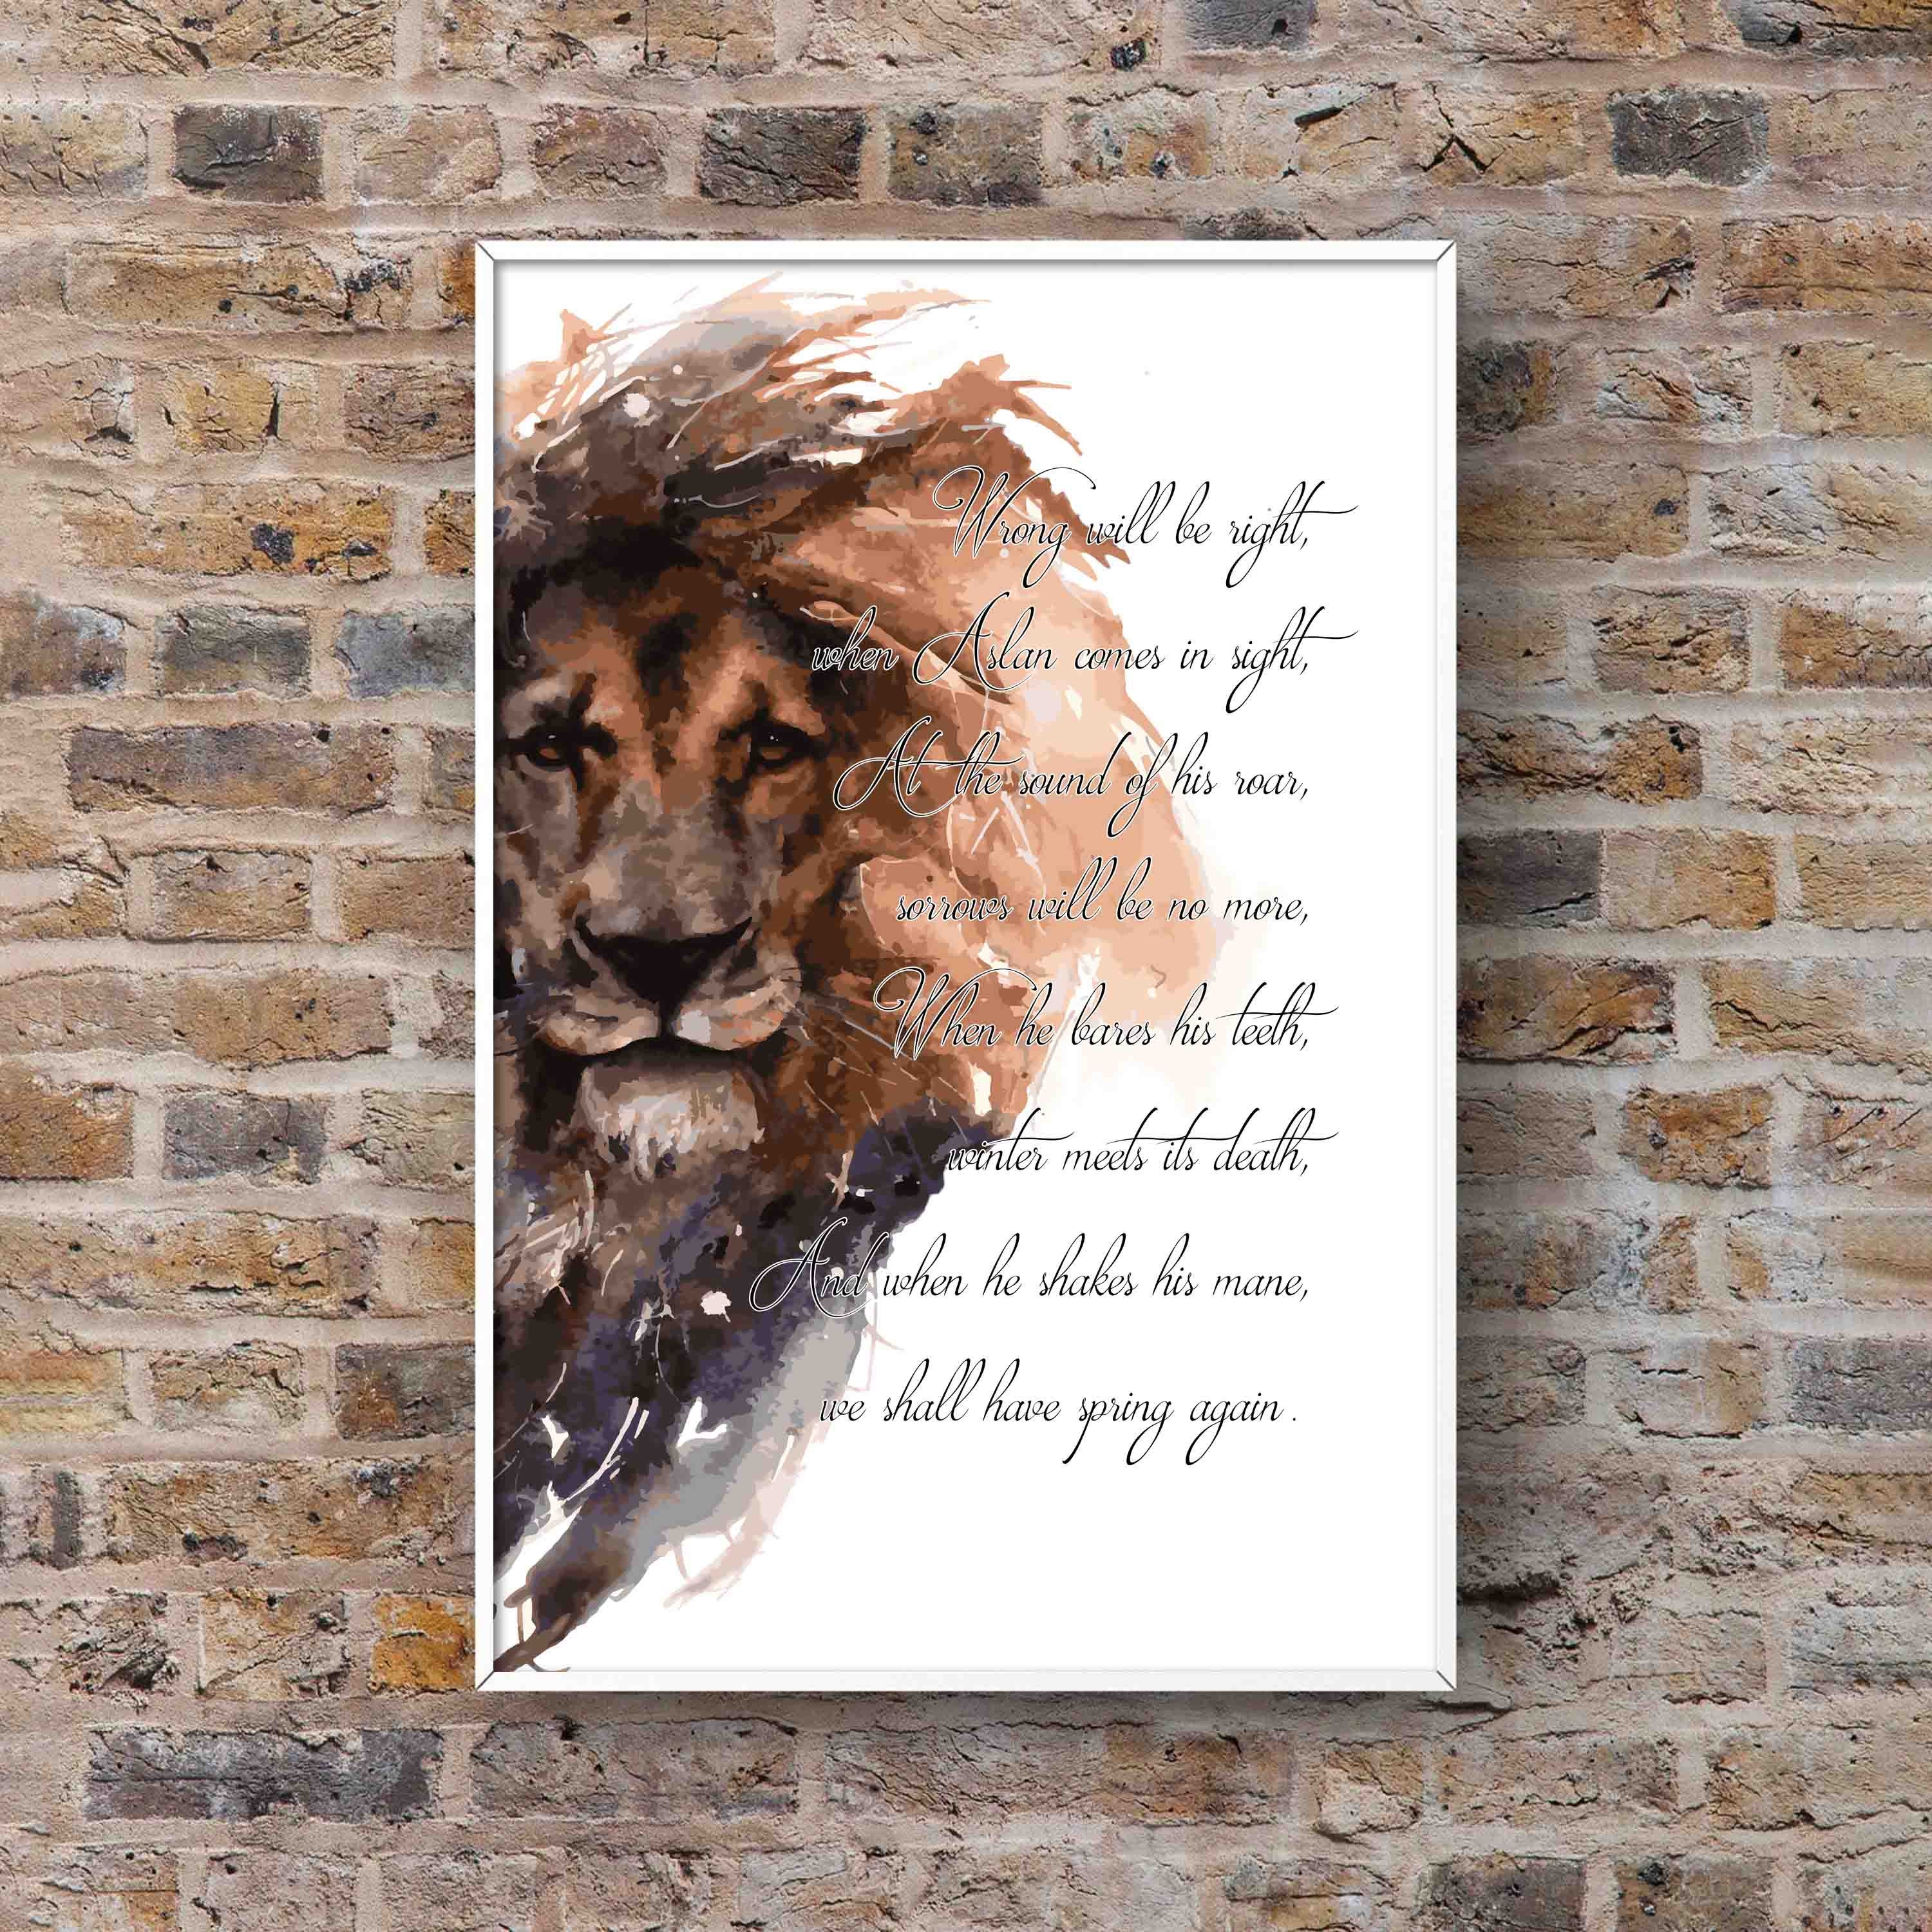  DigTour WallArt Chronicles of Narnia Aslan Safe Wall Quote  Vinyl Wall Decal Inspirational Wall Sticker Words Wall Graphic Home Art  Decoration Dark Brown : Tools & Home Improvement